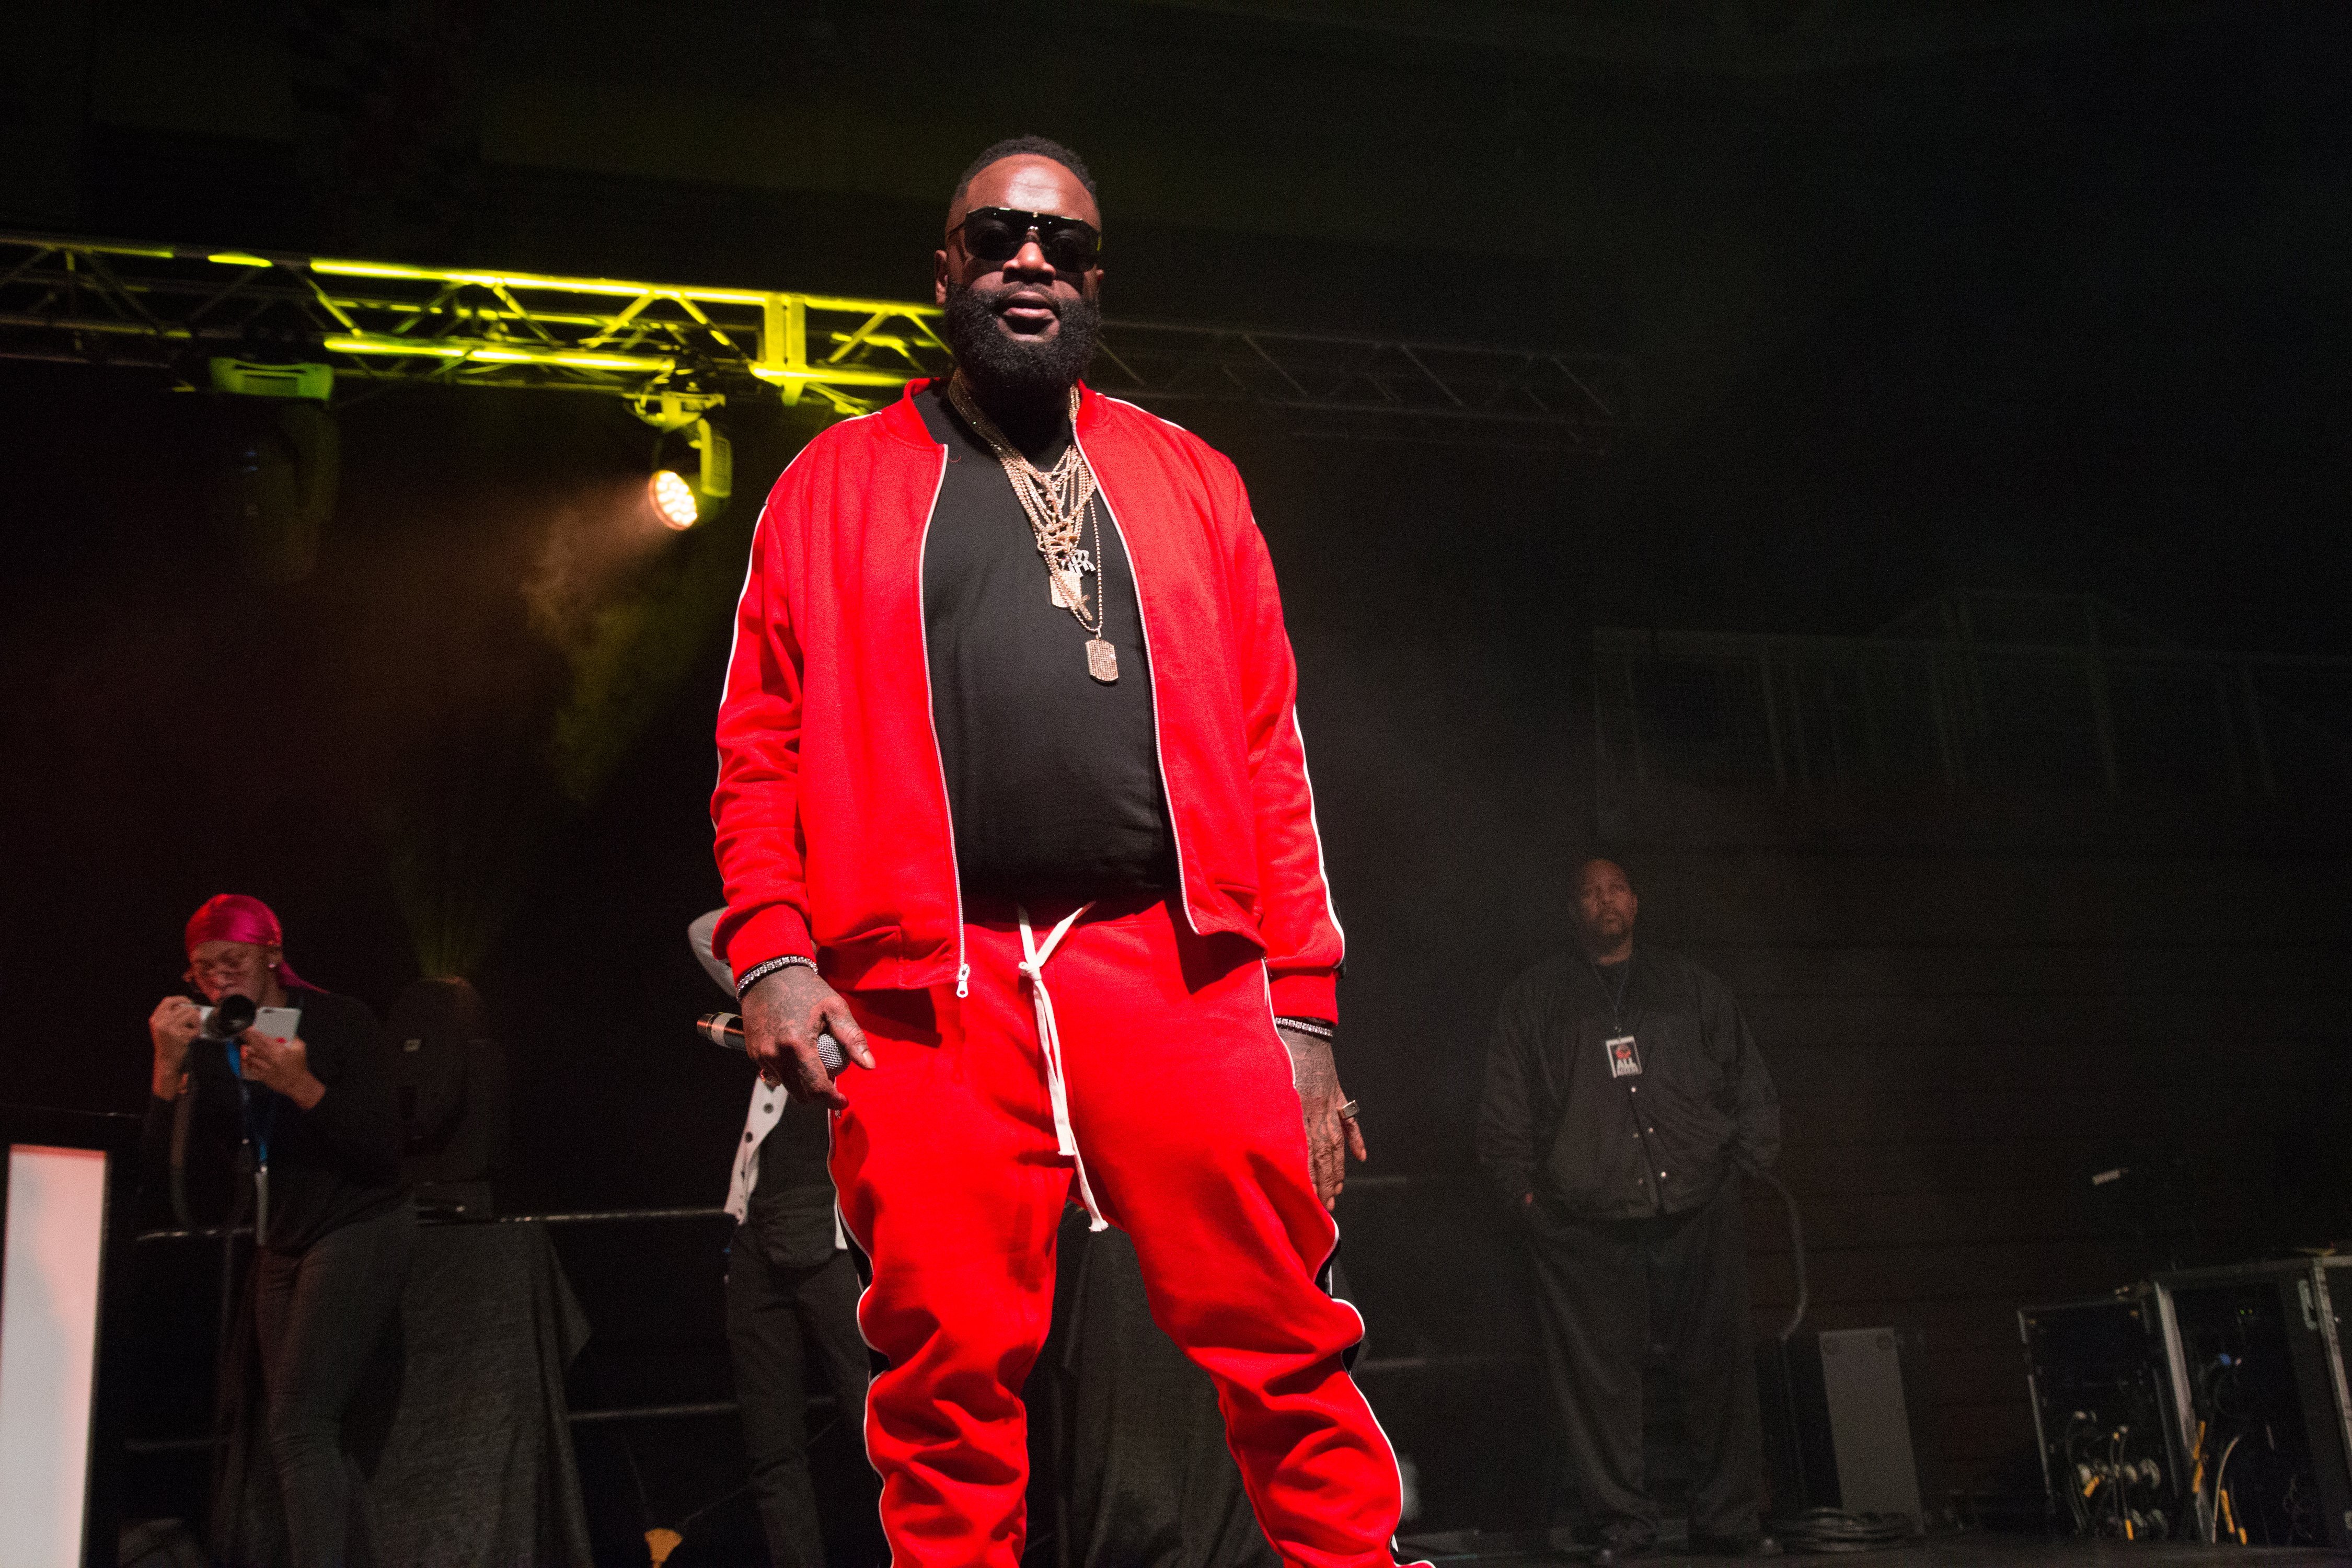 Rick Ross performing at the Coppin State University Homecoming in February 2018 in Maryland. | Photo: Getty Images